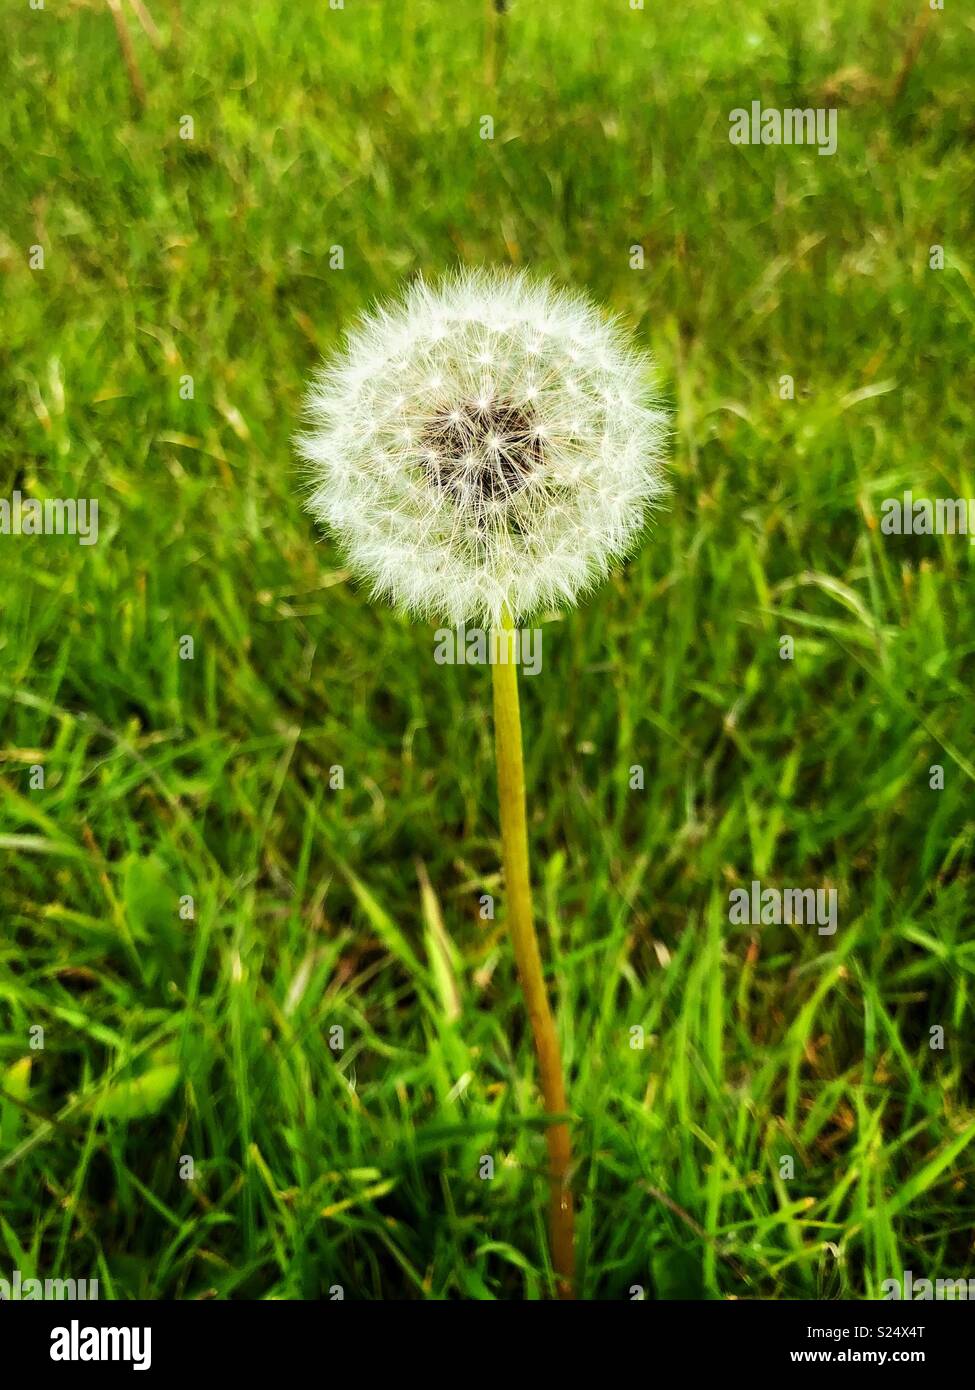 Dandelion waiting to blown away in the wind Stock Photo